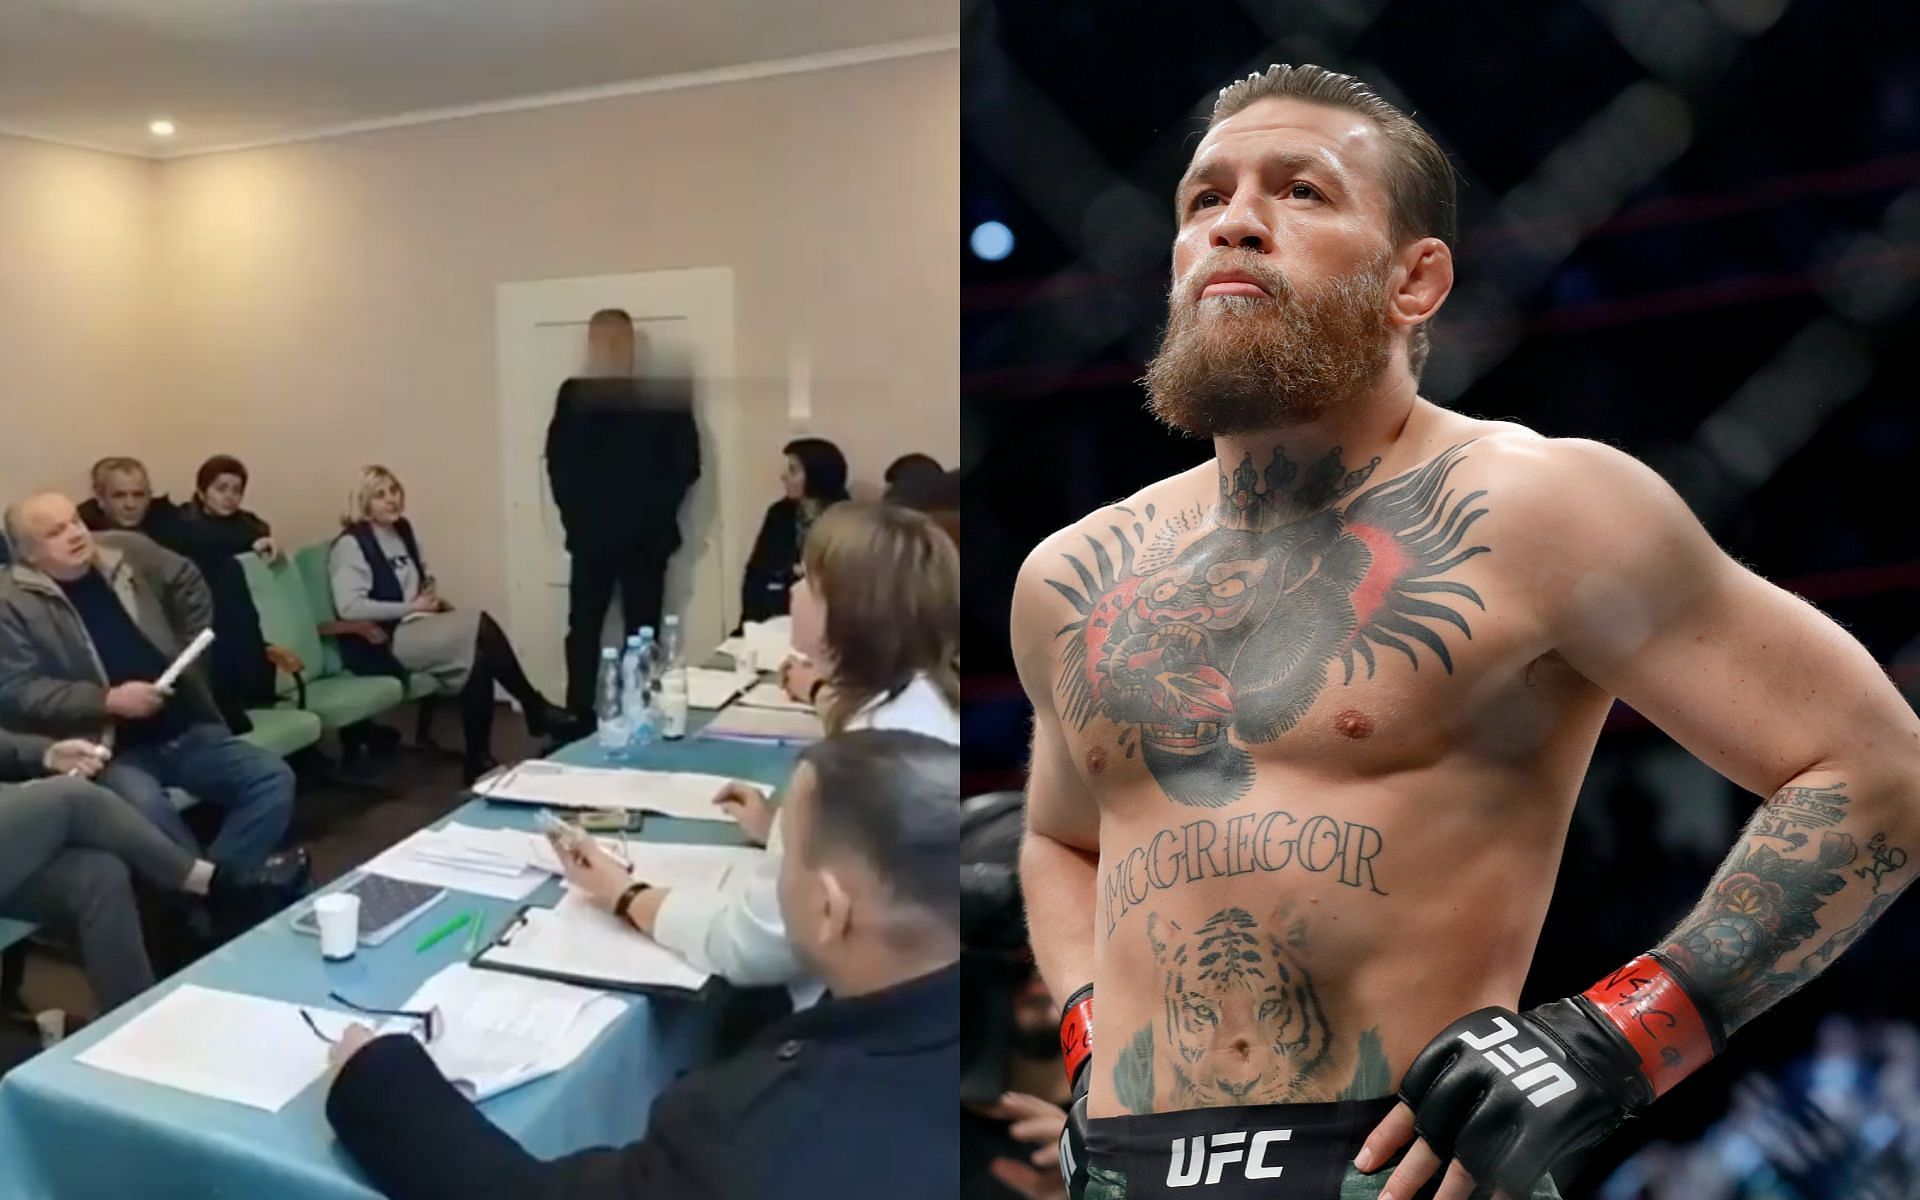 Screenshot of incident (left) and Conor Mcgregor (right) [Image via: Getty Images and @vynts_tv on X] 